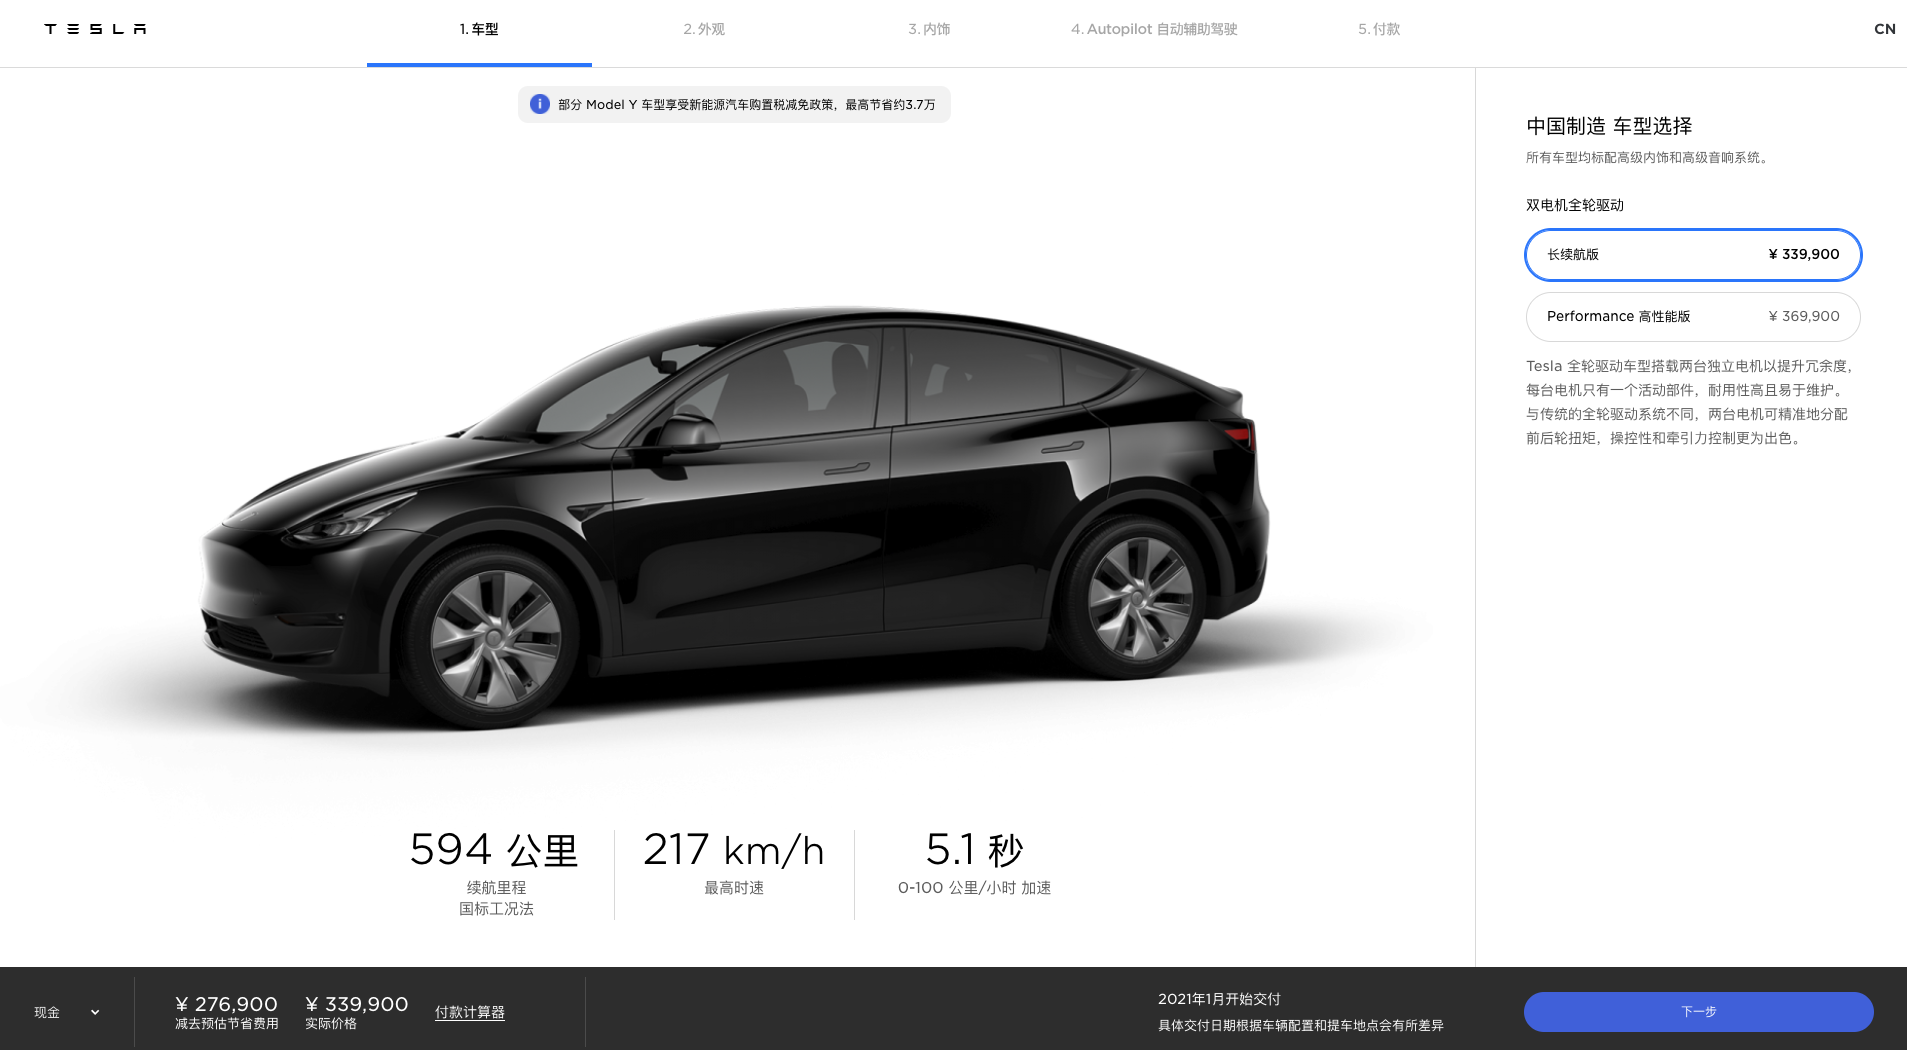 Tesla updates Model Y Design Studio in China: deliveries to begin January  2021 with lower price, new center console, Bioweapon defense mode, and  heated steering wheel [Update] - Drive Tesla